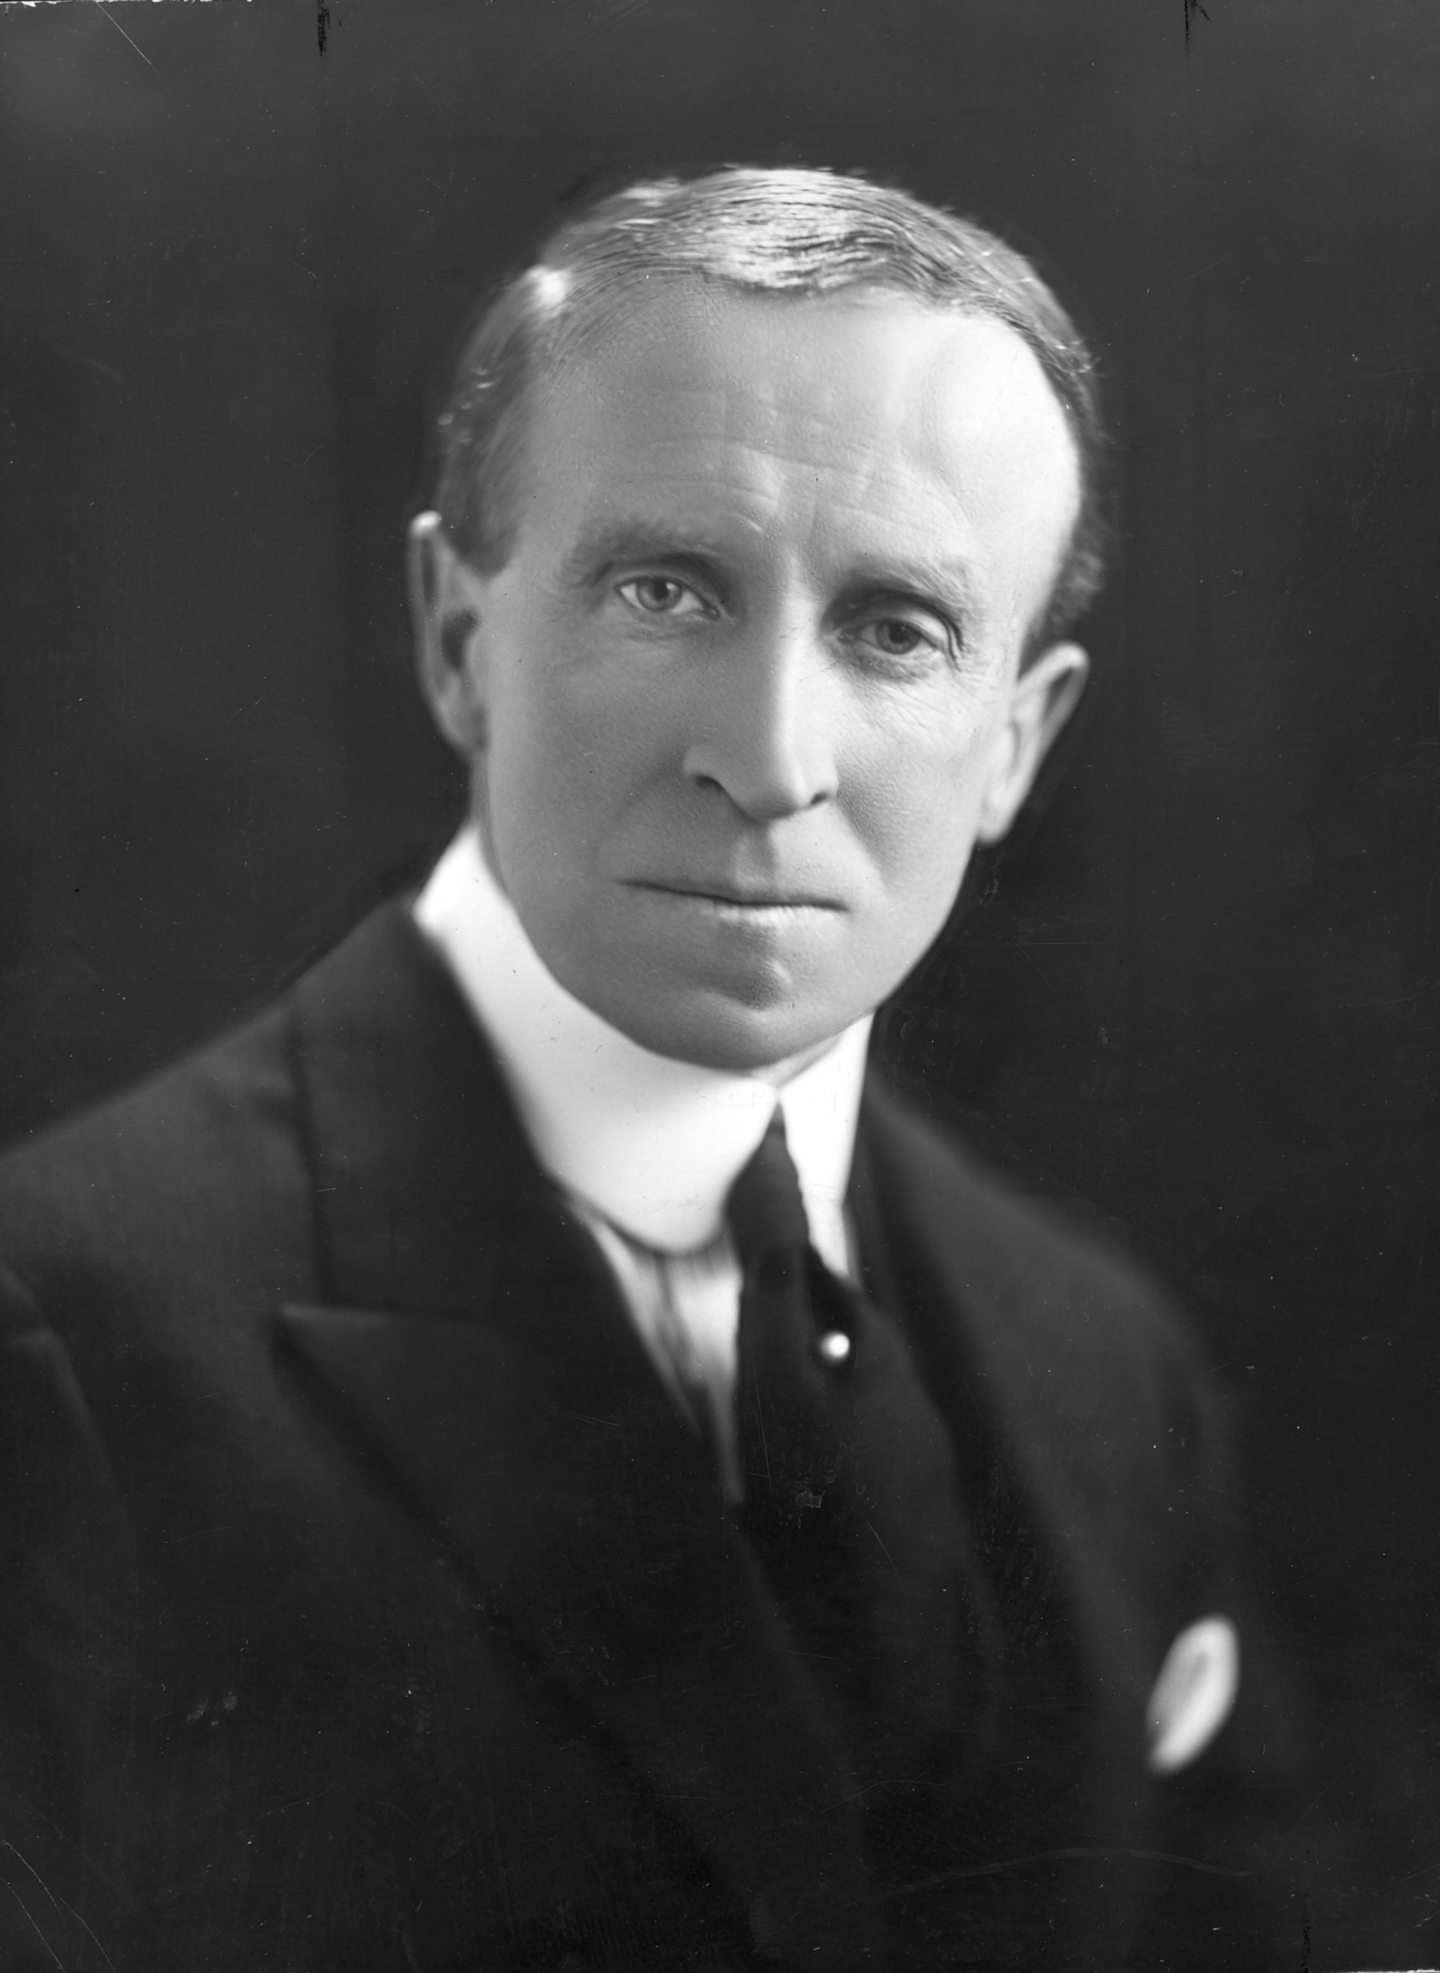 Many have said author John Buchan was inspired by Ravenscraig to write The 39 Steps.